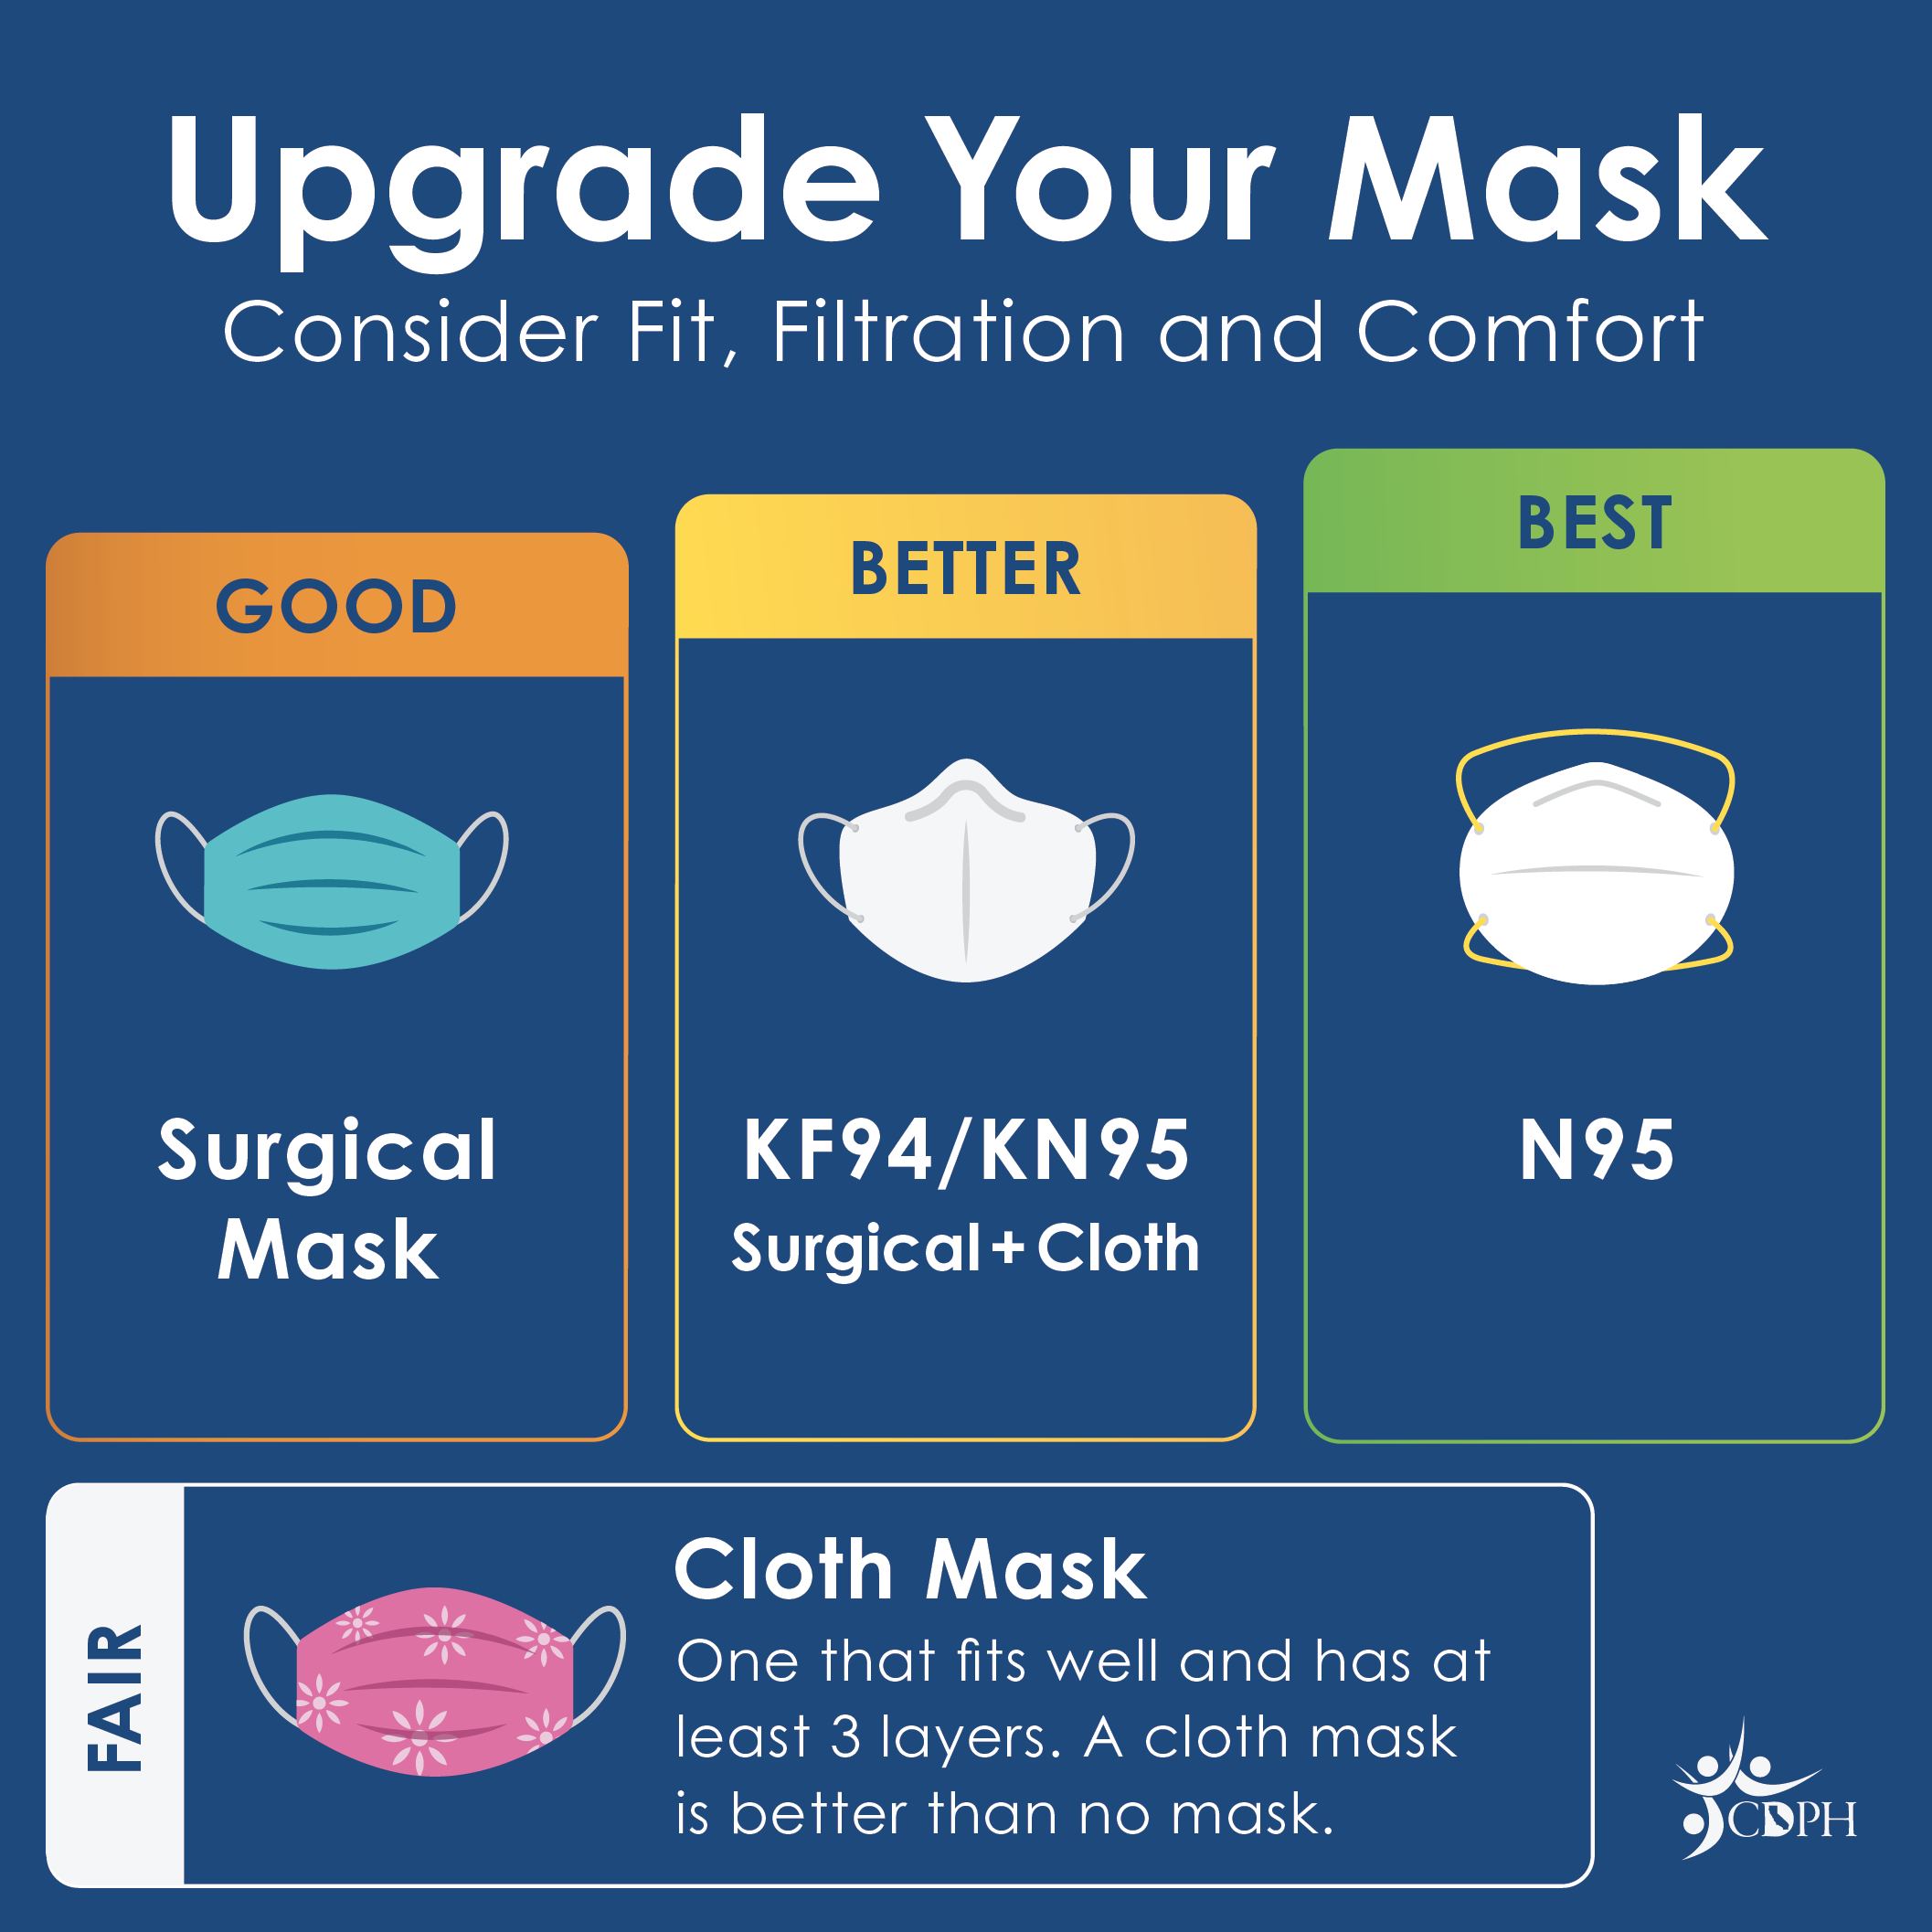 Best mask is N95. Next level is KF95, KN95, fitted surgical masks, and double masks. Surgical masks are better than cloth mask.